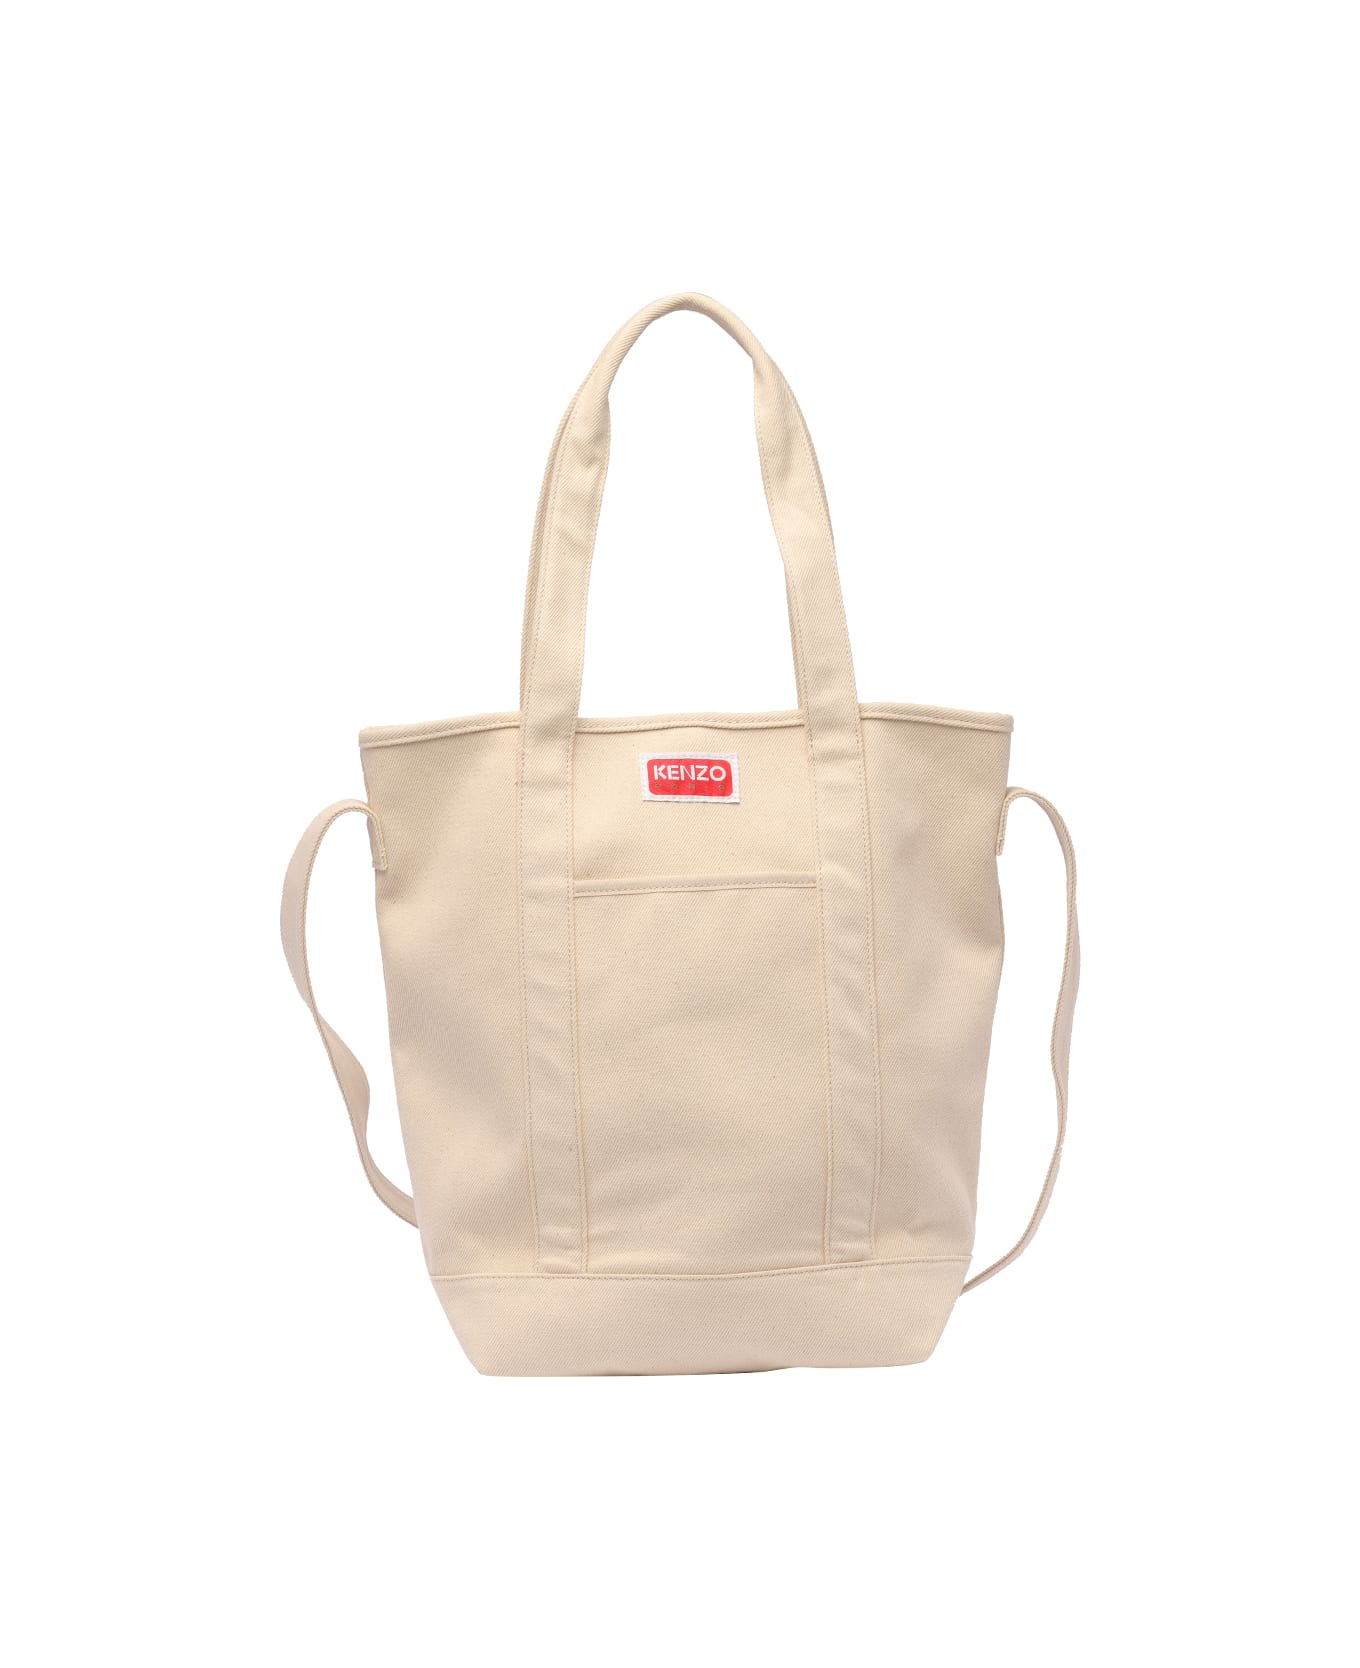 Kenzo Logo Patched Tote - Beige